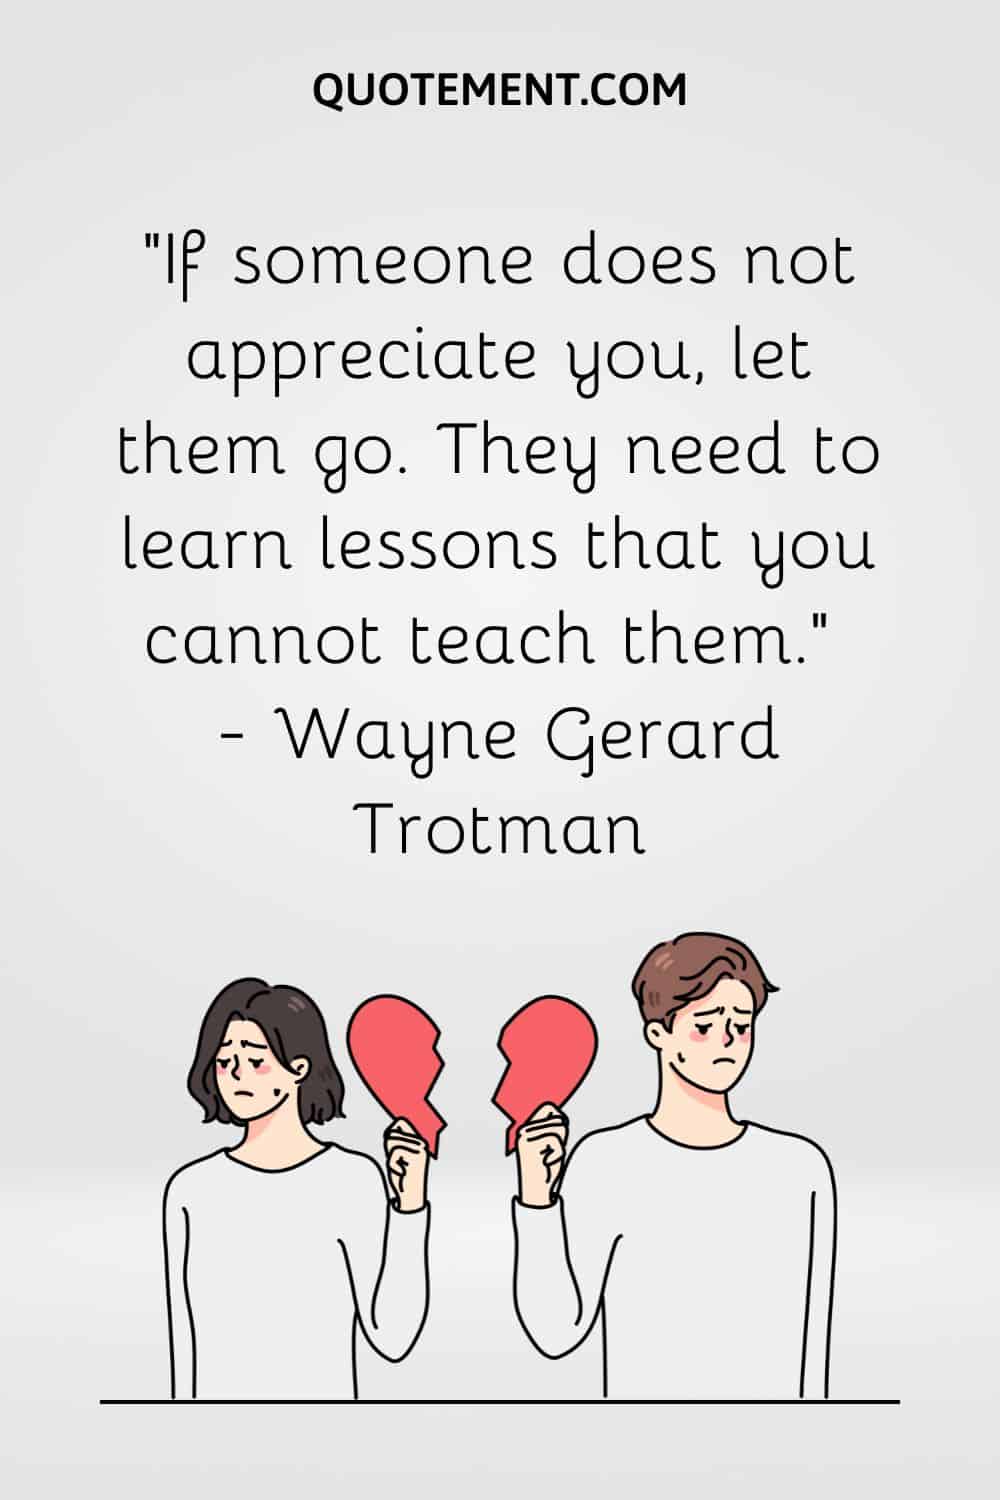 illustration of two people representing letting someone go quote